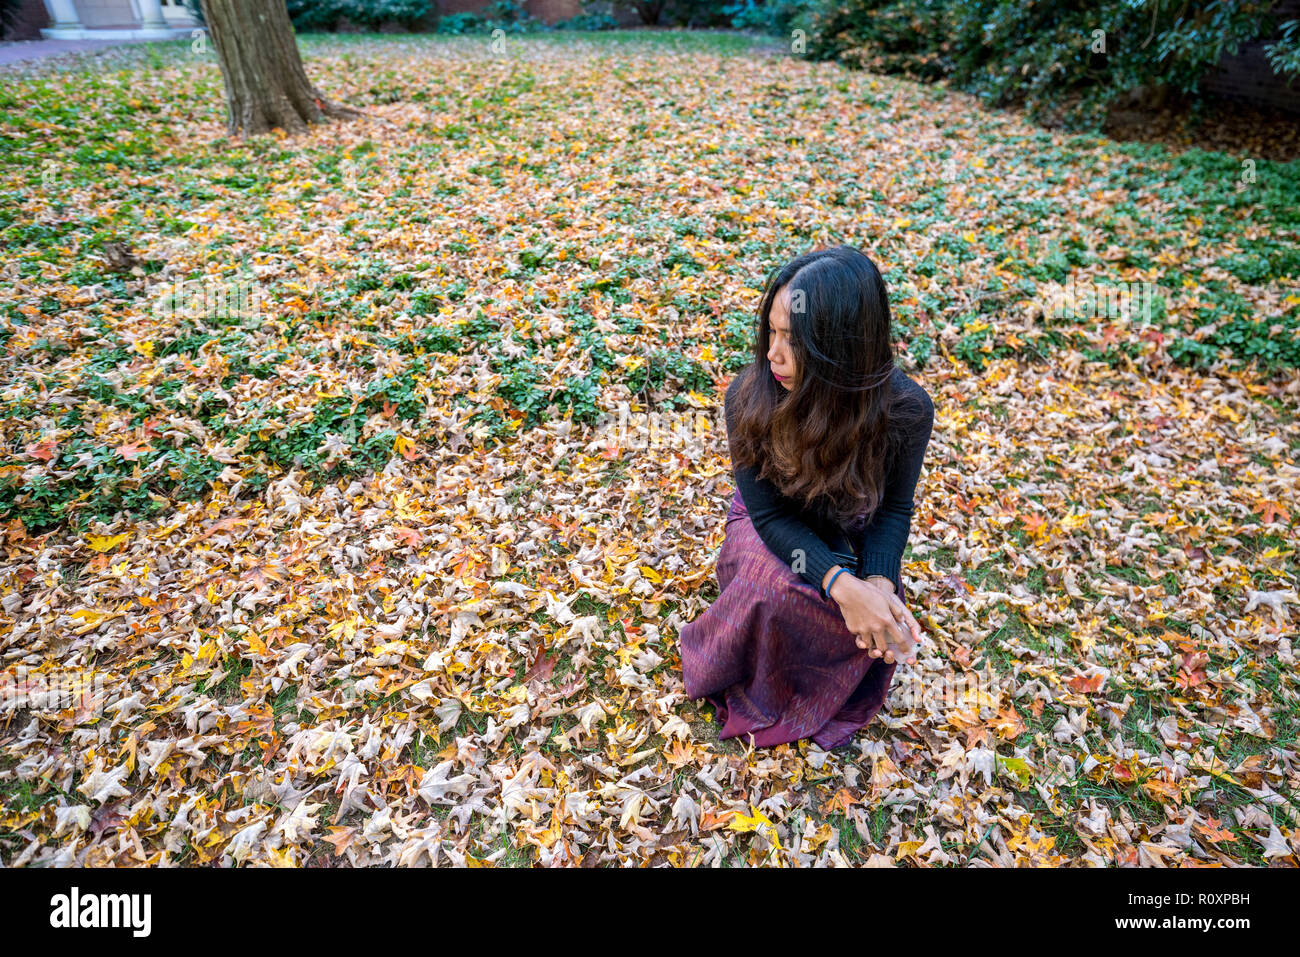 Thai woman kneeling on ground surrounded by leaves in the fall looking to the side Stock Photo